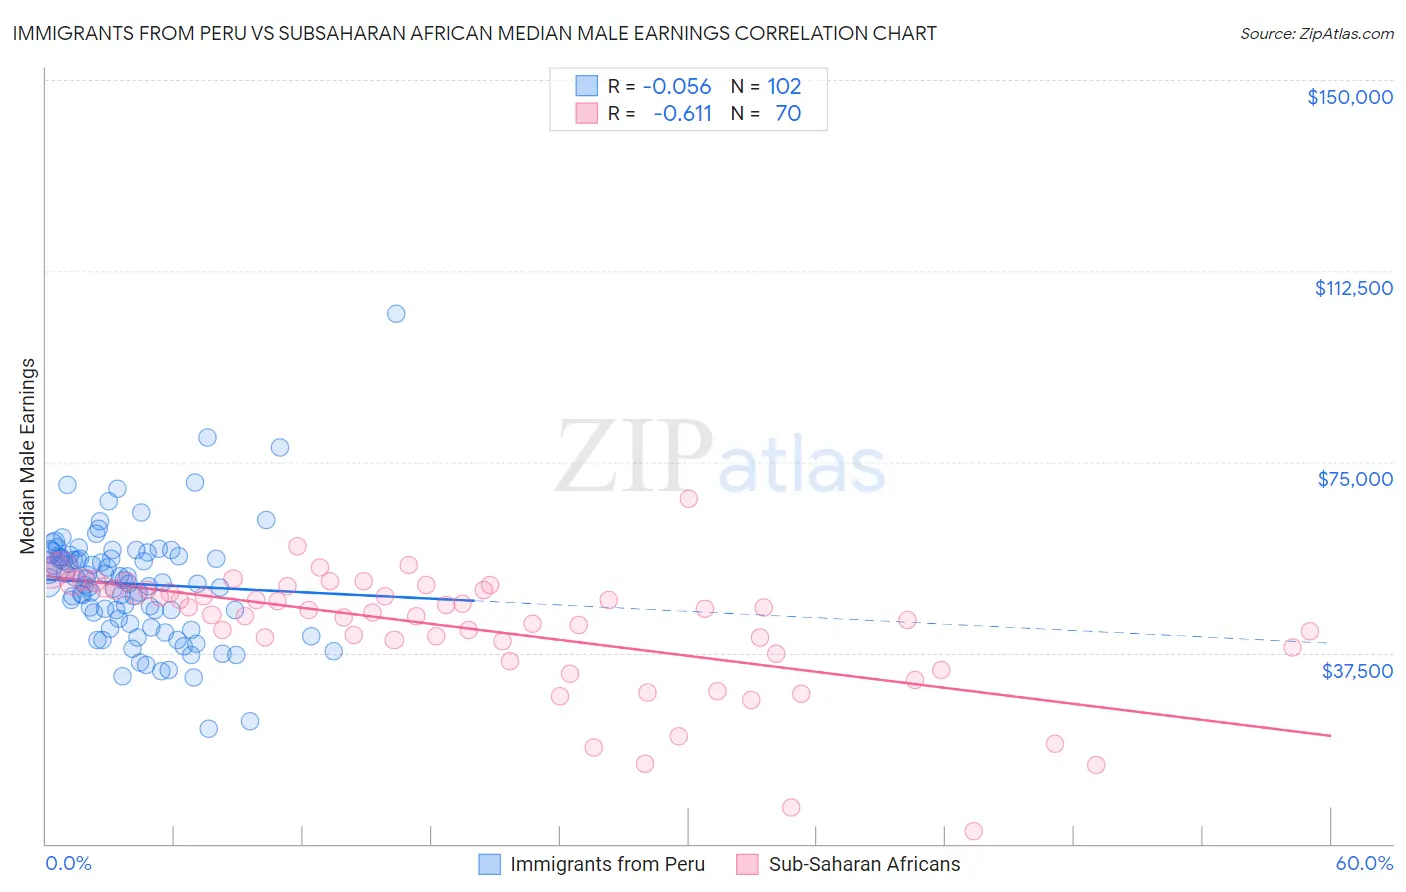 Immigrants from Peru vs Subsaharan African Median Male Earnings